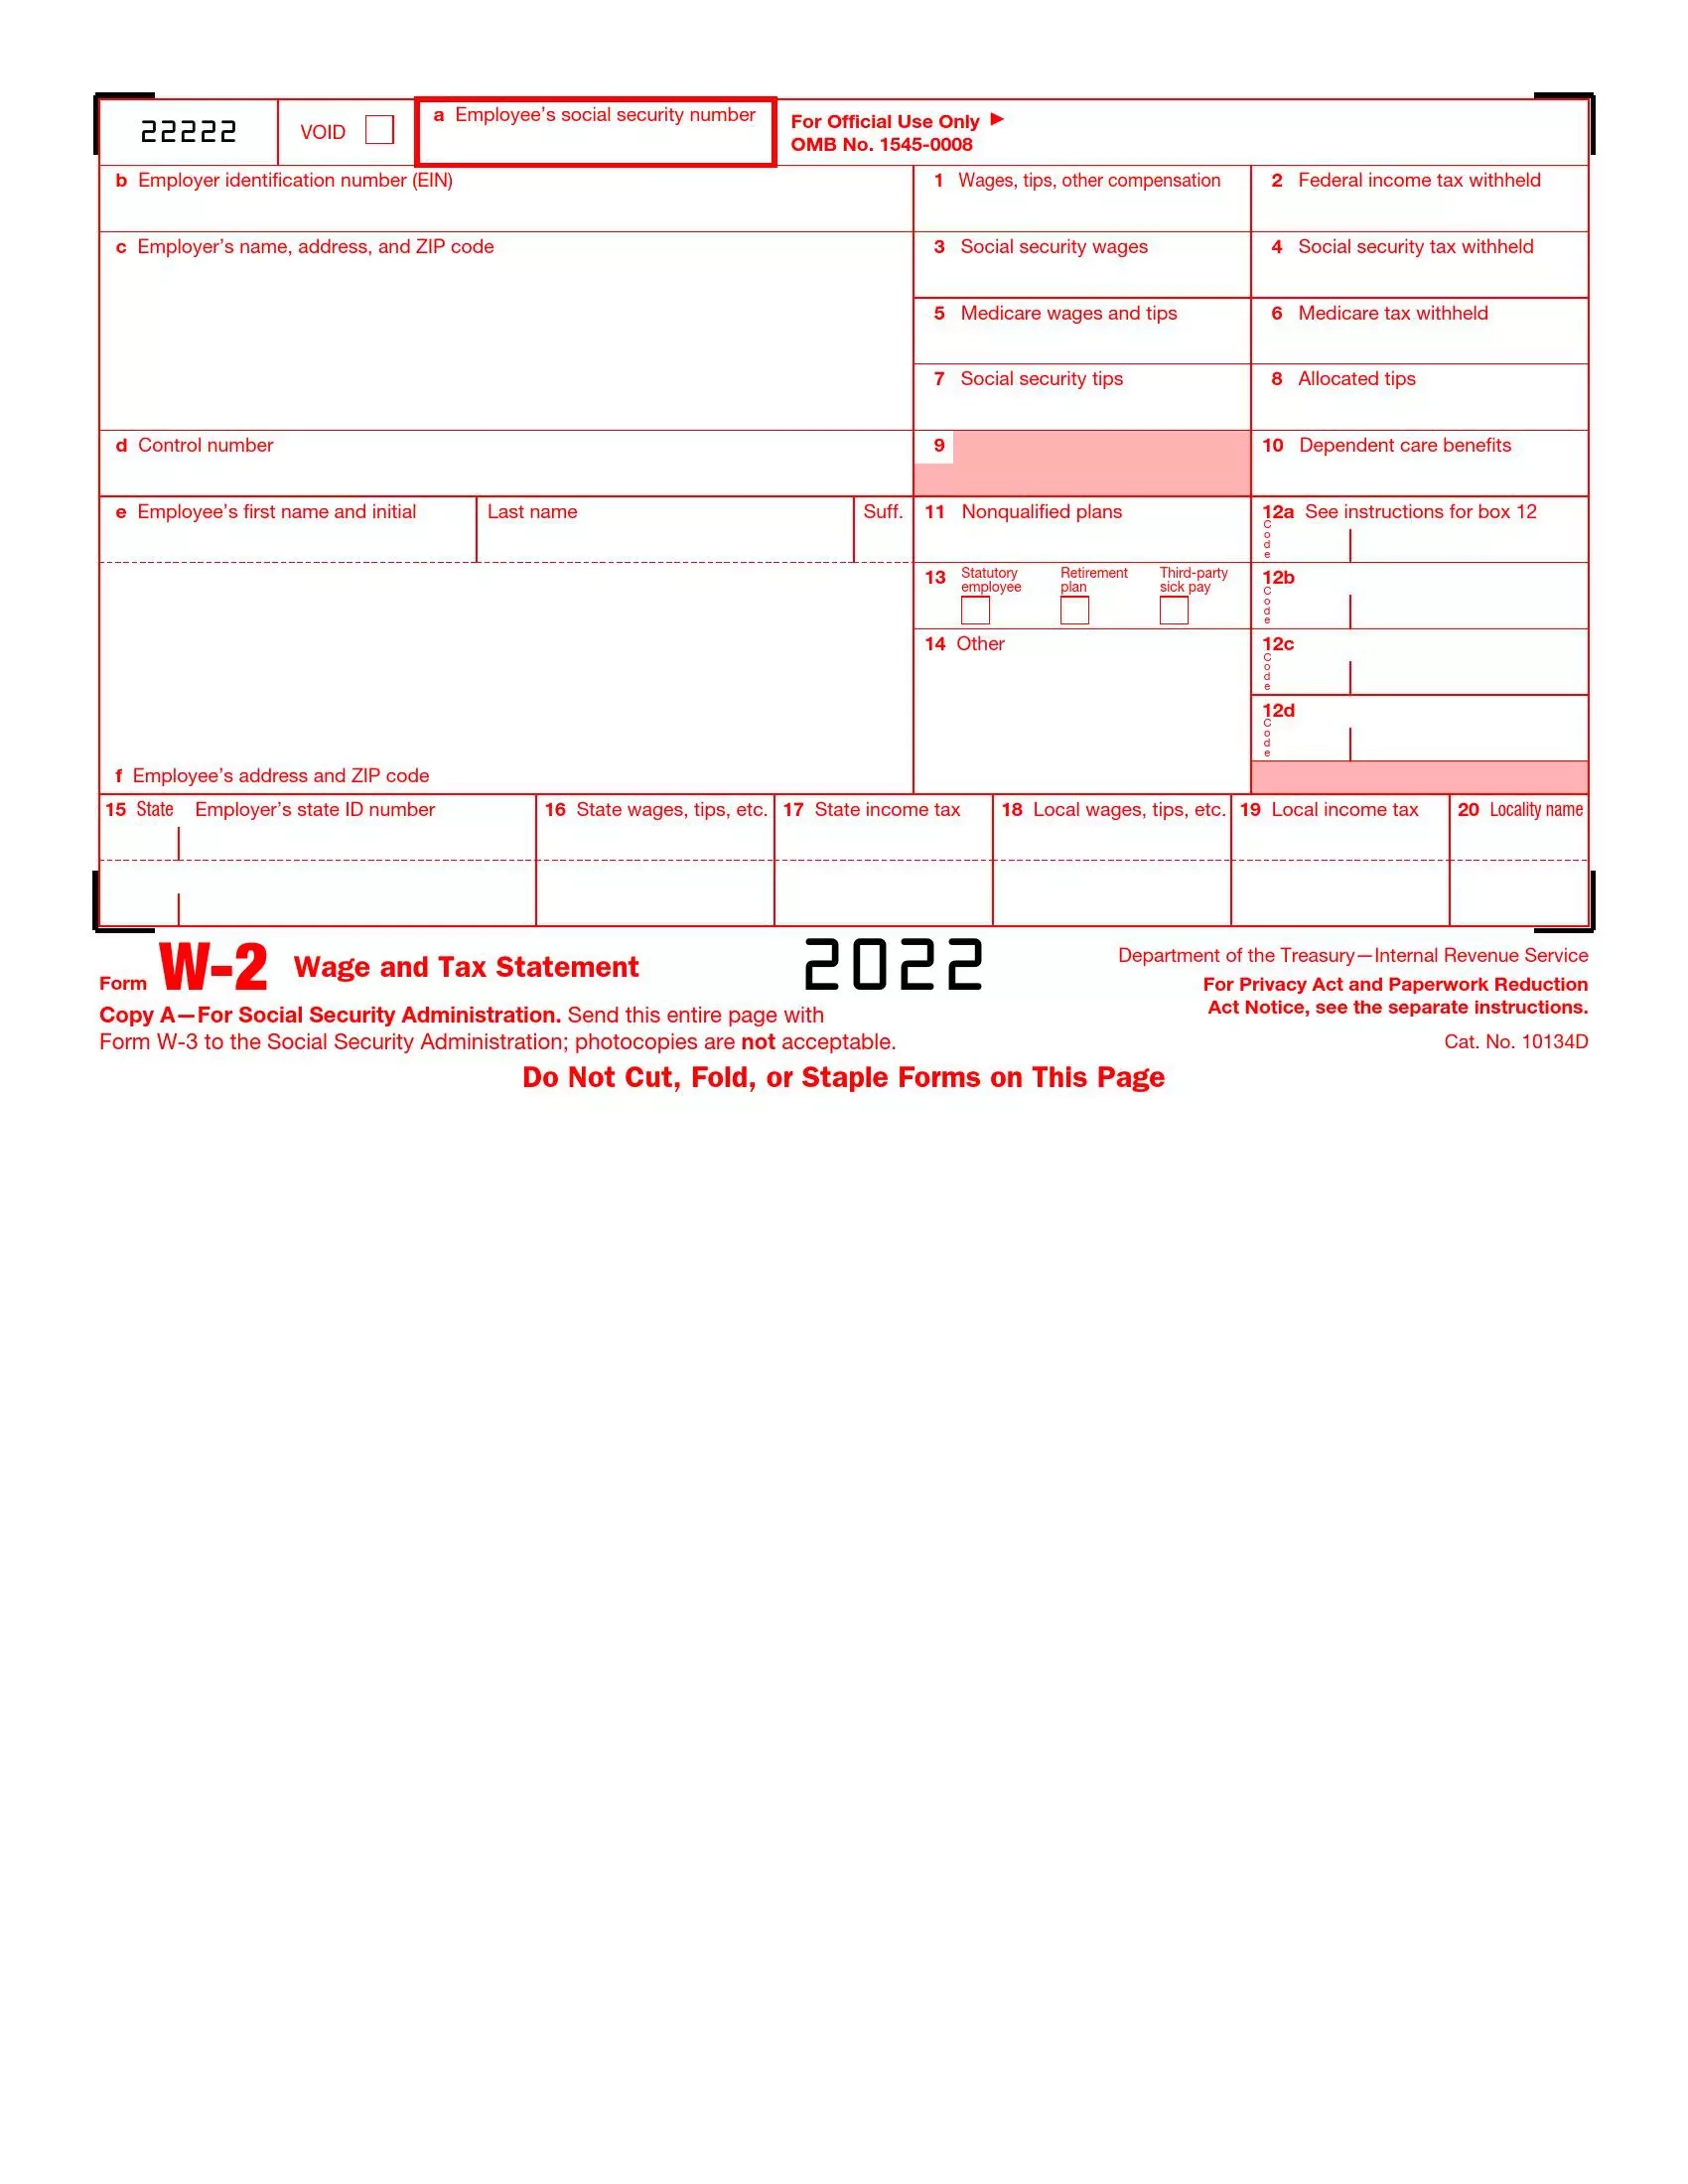 Irs Form W-2 ≡ Fill Out Printable Pdf Forms Online pertaining to Irs Forms W2